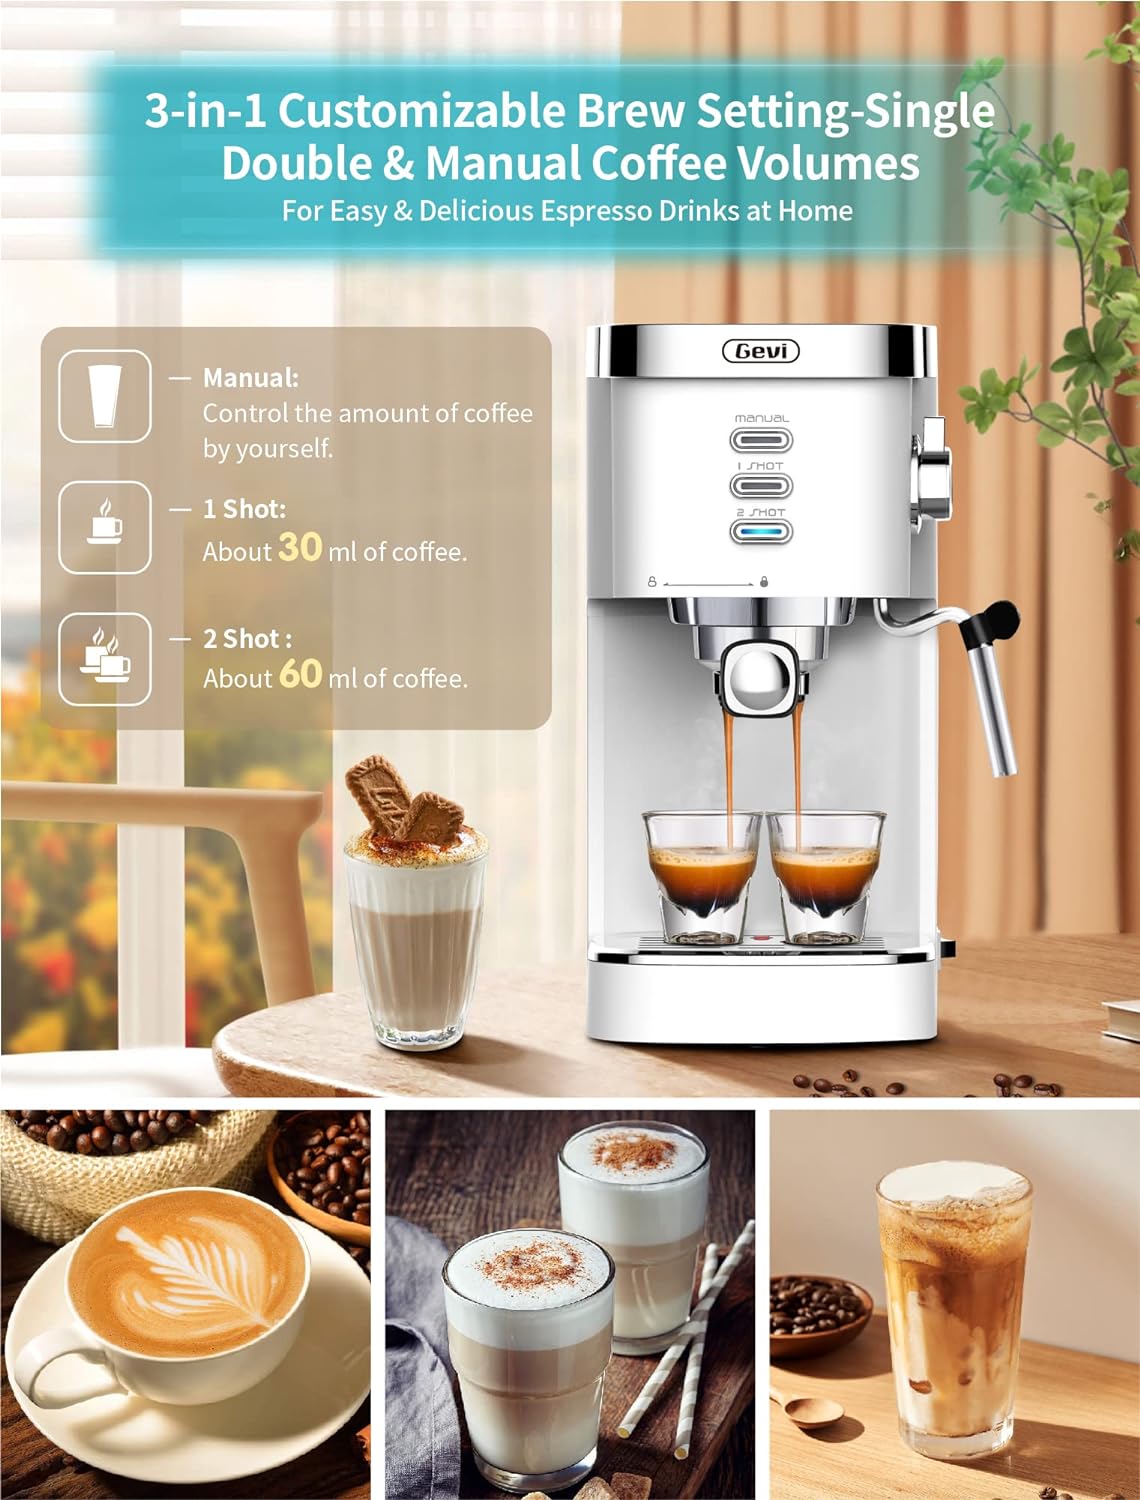 Gevi Espresso Machines 20 Bar Fast Heating Automatic Cappuccino Coffee Maker with Foaming Milk Frother Wand for Espresso, Latte Macchiato, Coffee Serving Sets